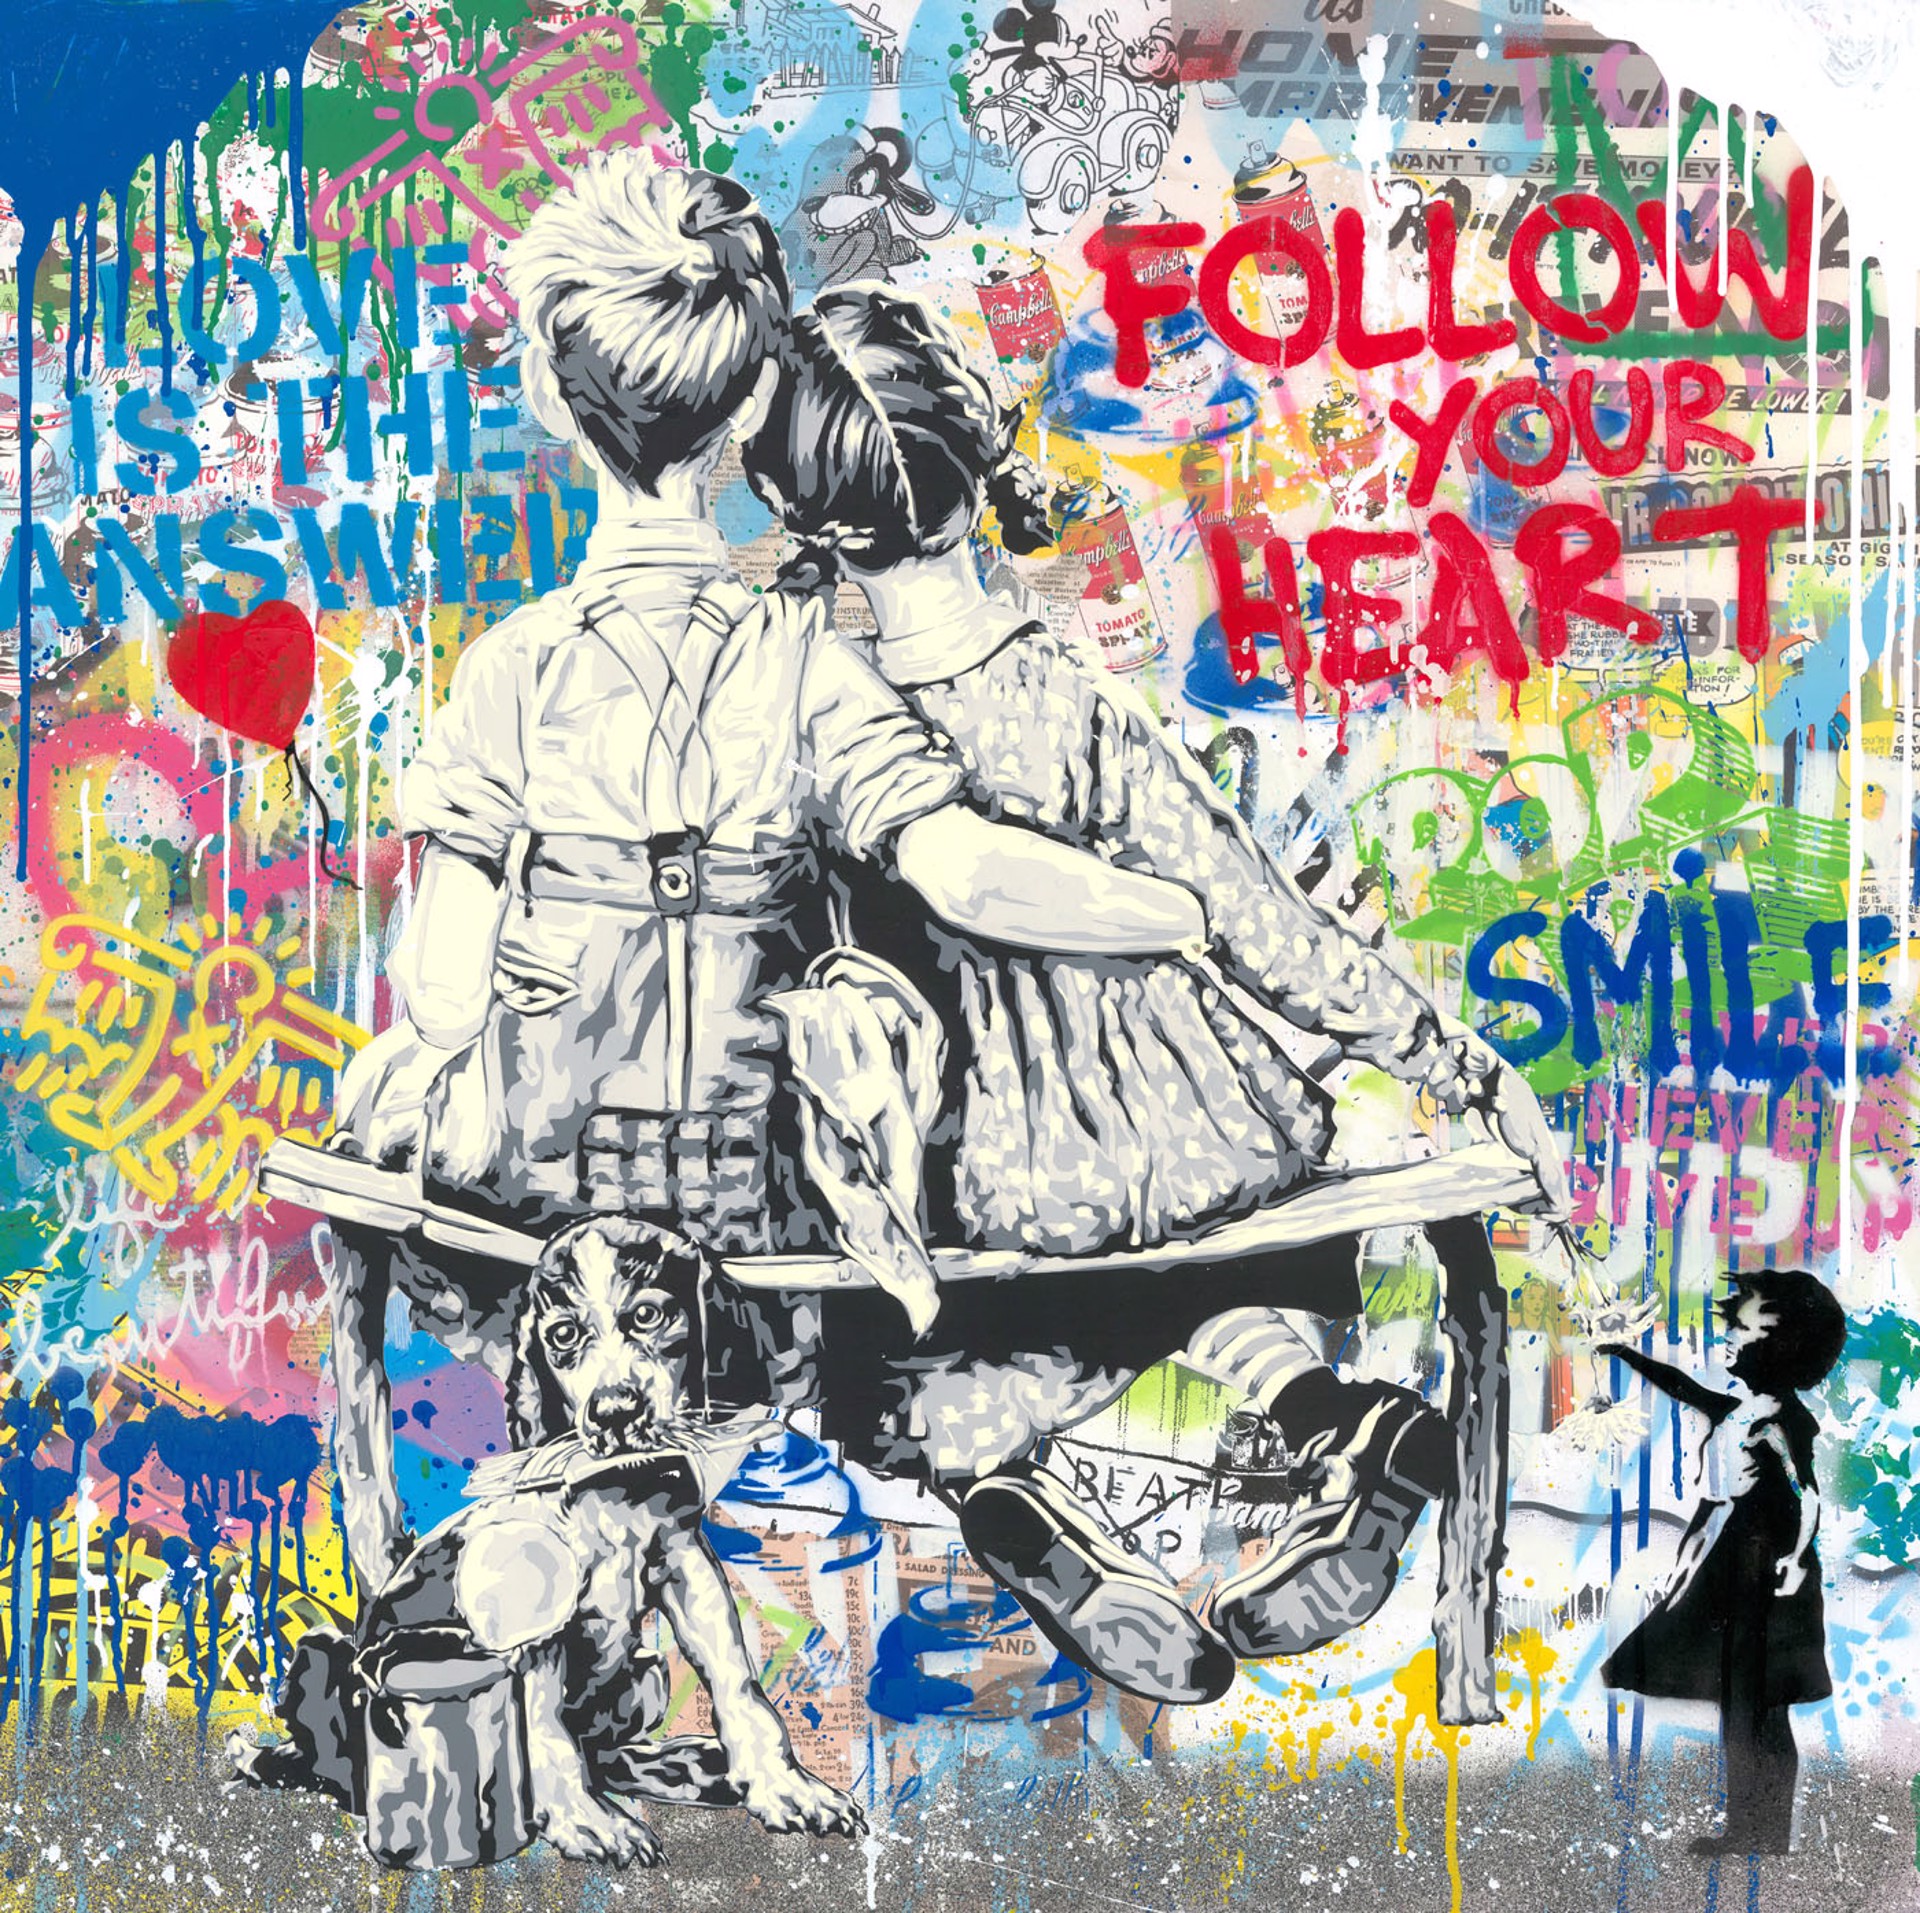 Works Well Together by Mr Brainwash